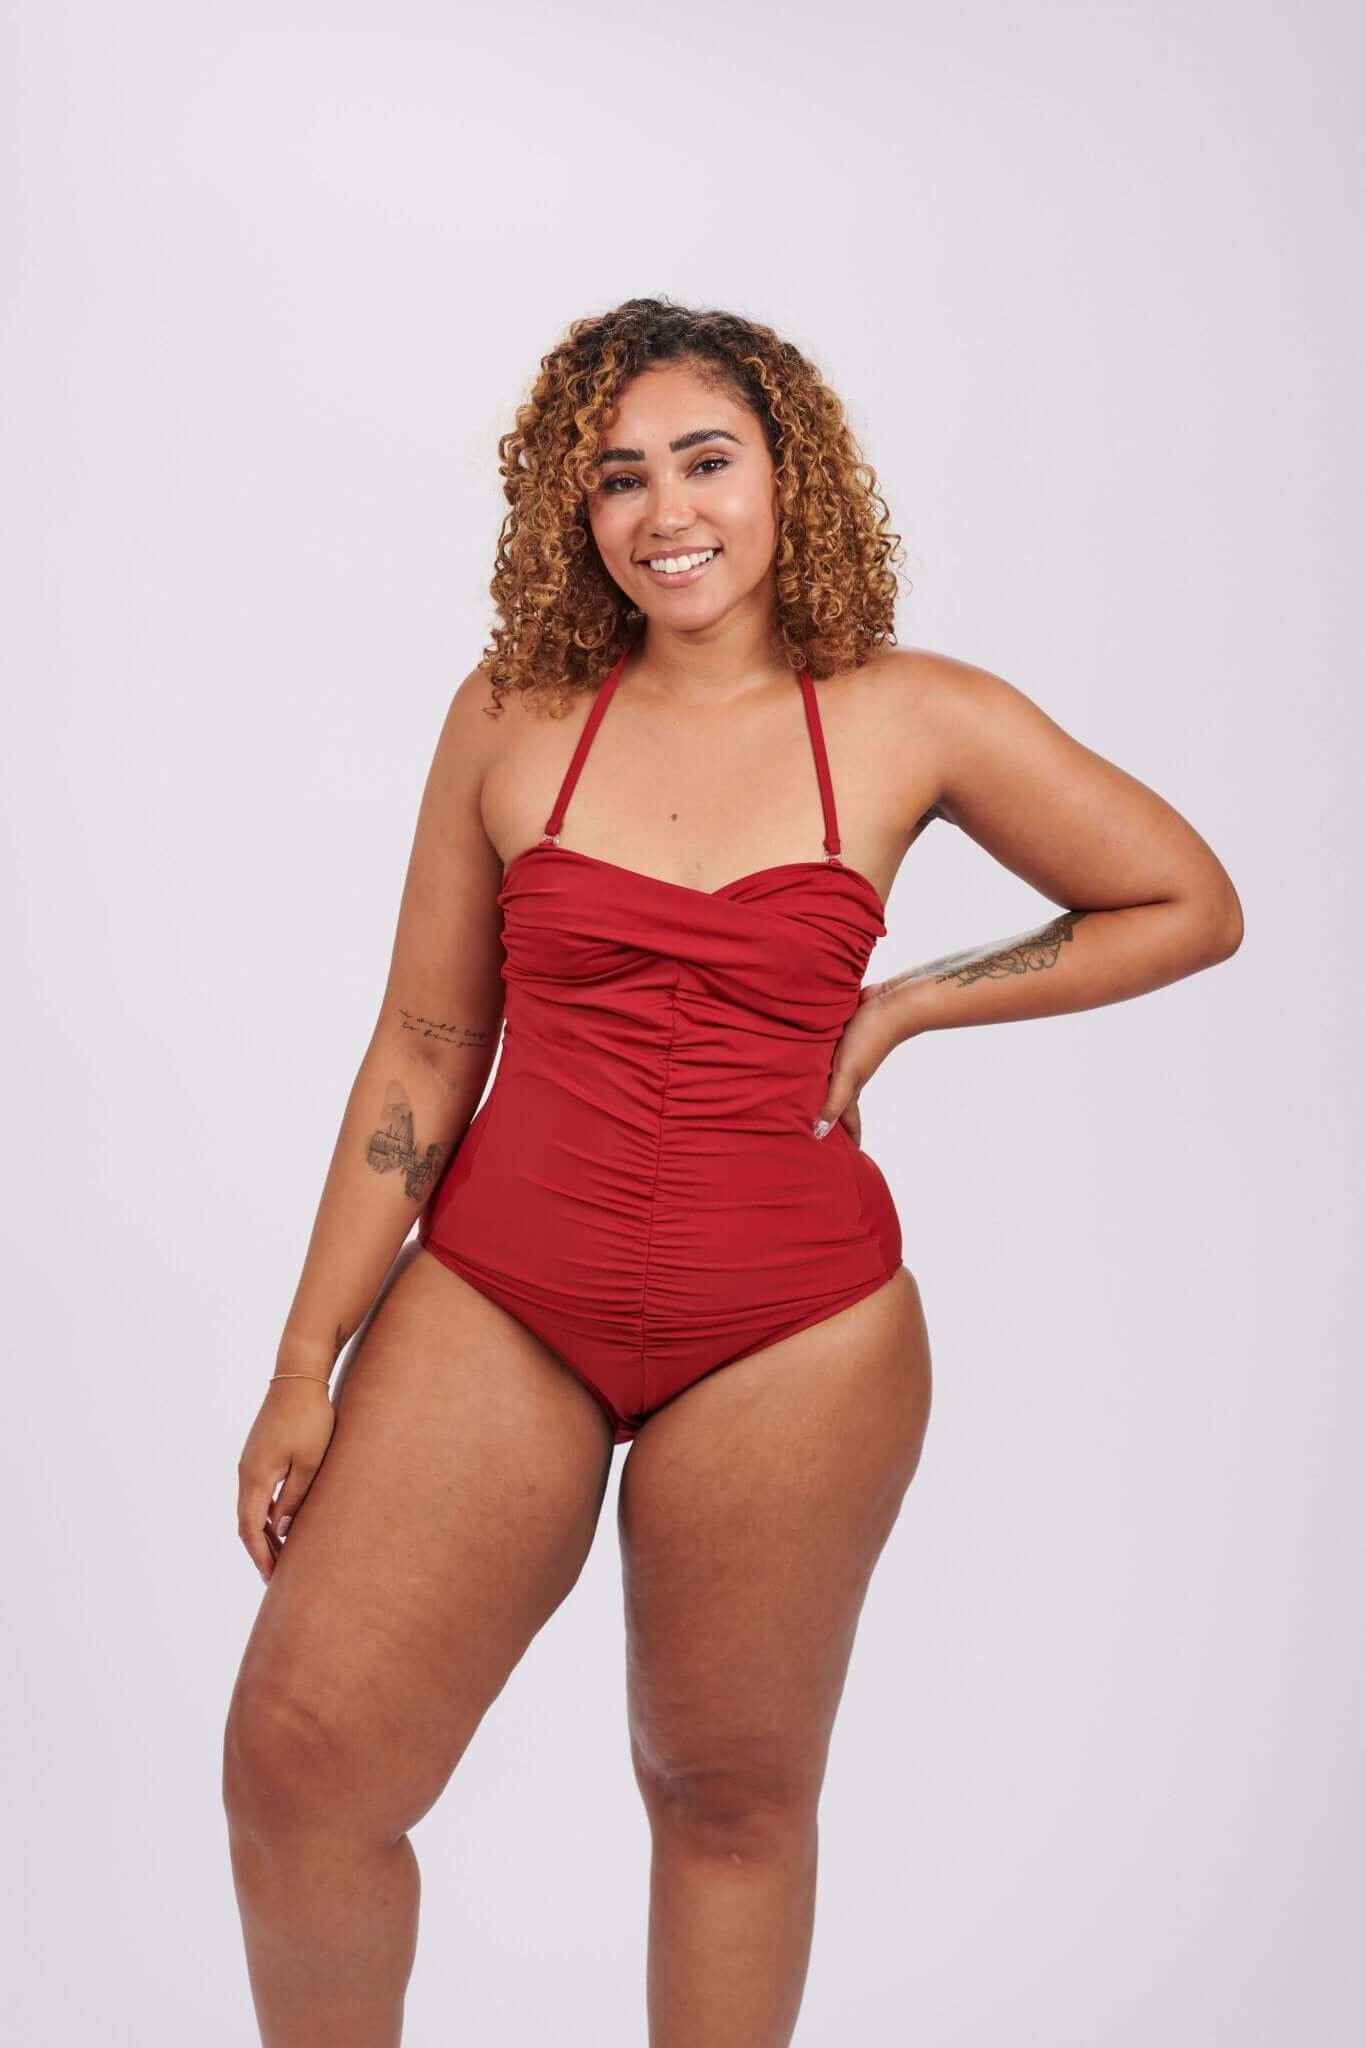 Shop Alicia Ostomy Swimsuit only £34.99 at whiteroseostomy.co.uk- with free UK delivery on all orders over £50